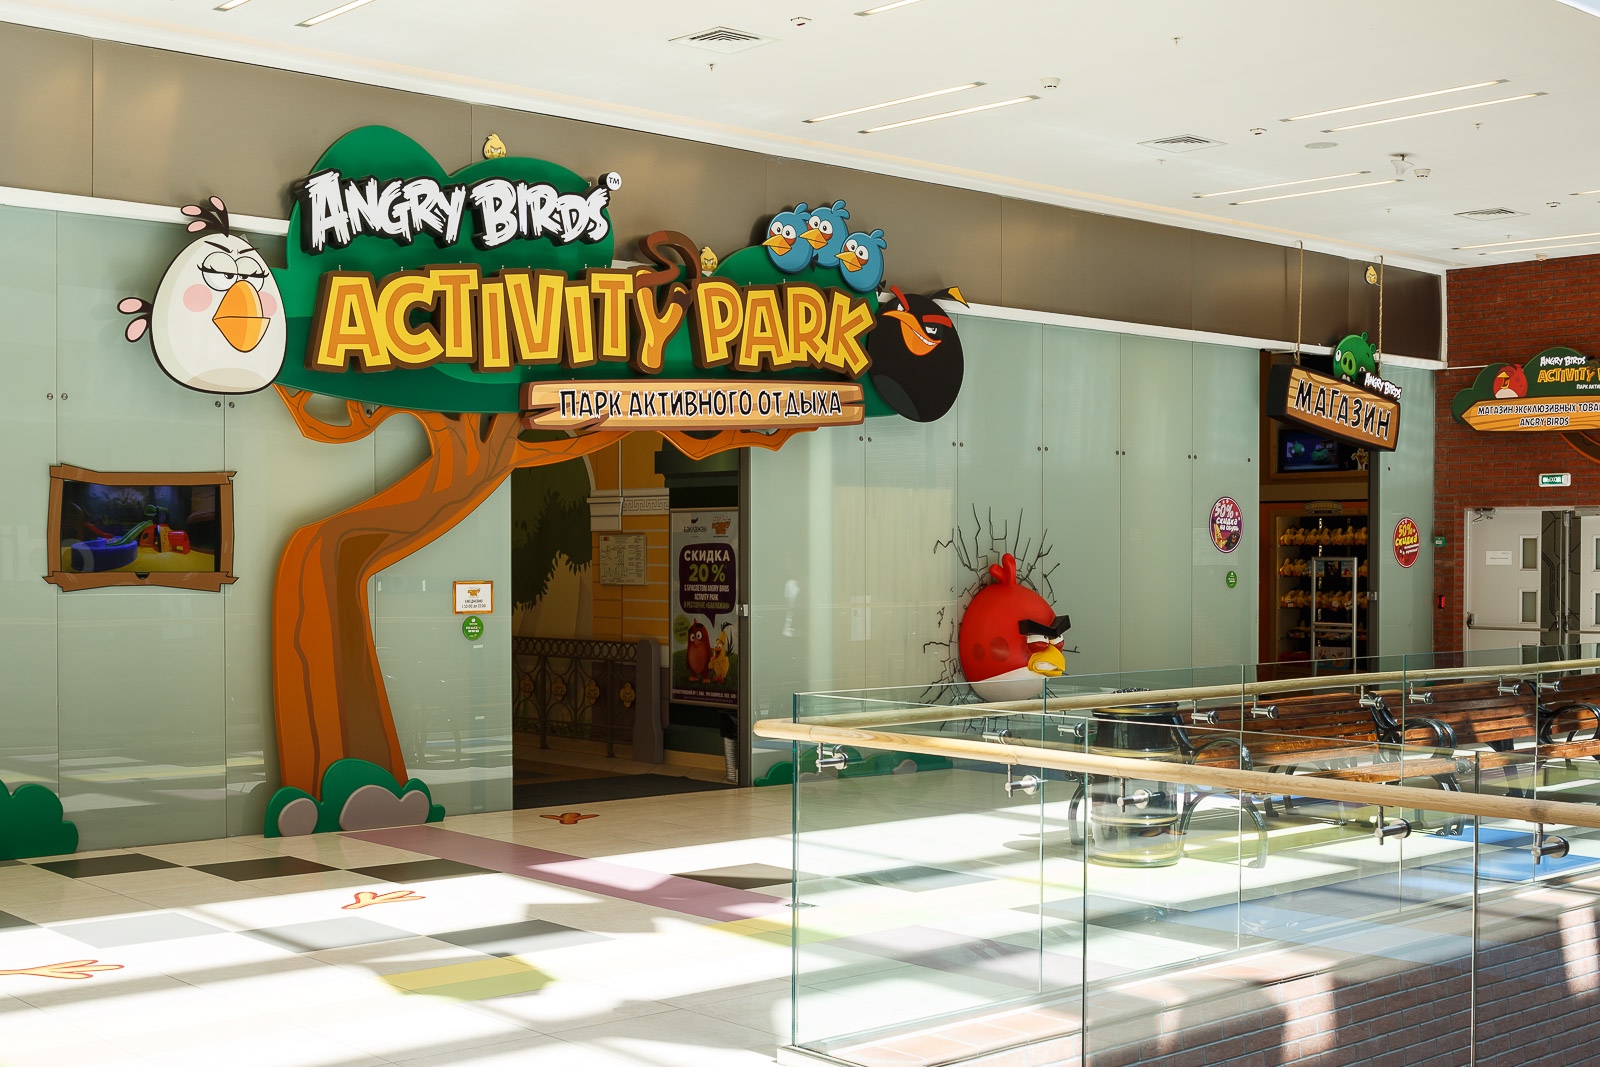 The Angry Birds Activity Park